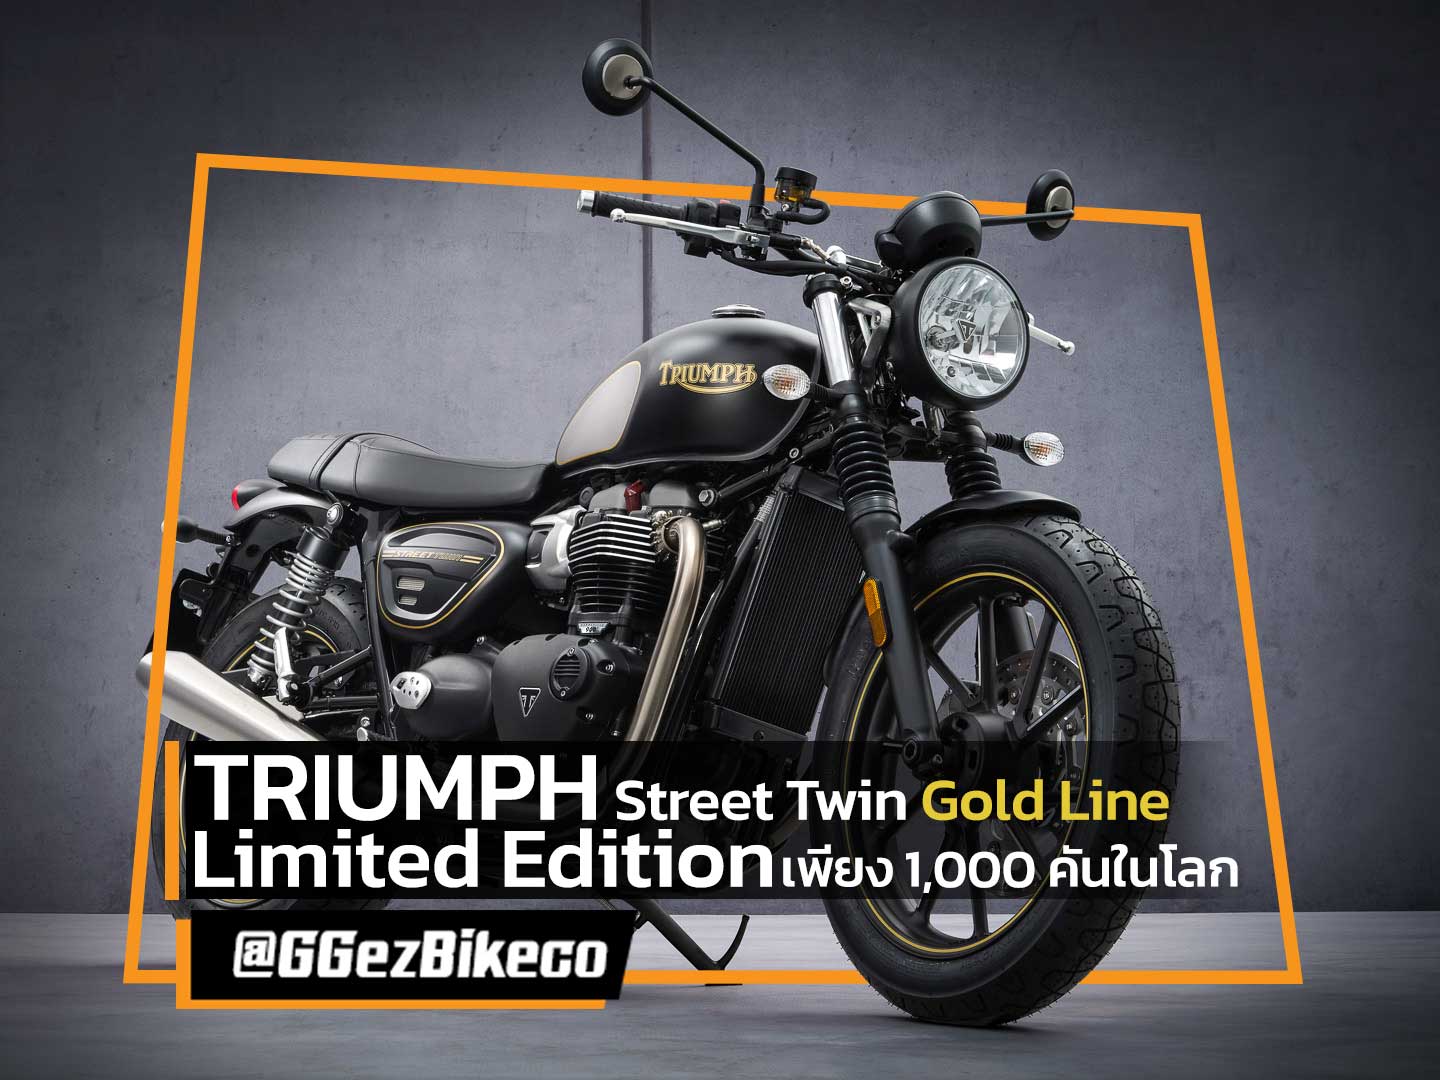 Triumph Street Twin Goldline Limited Edition page 01